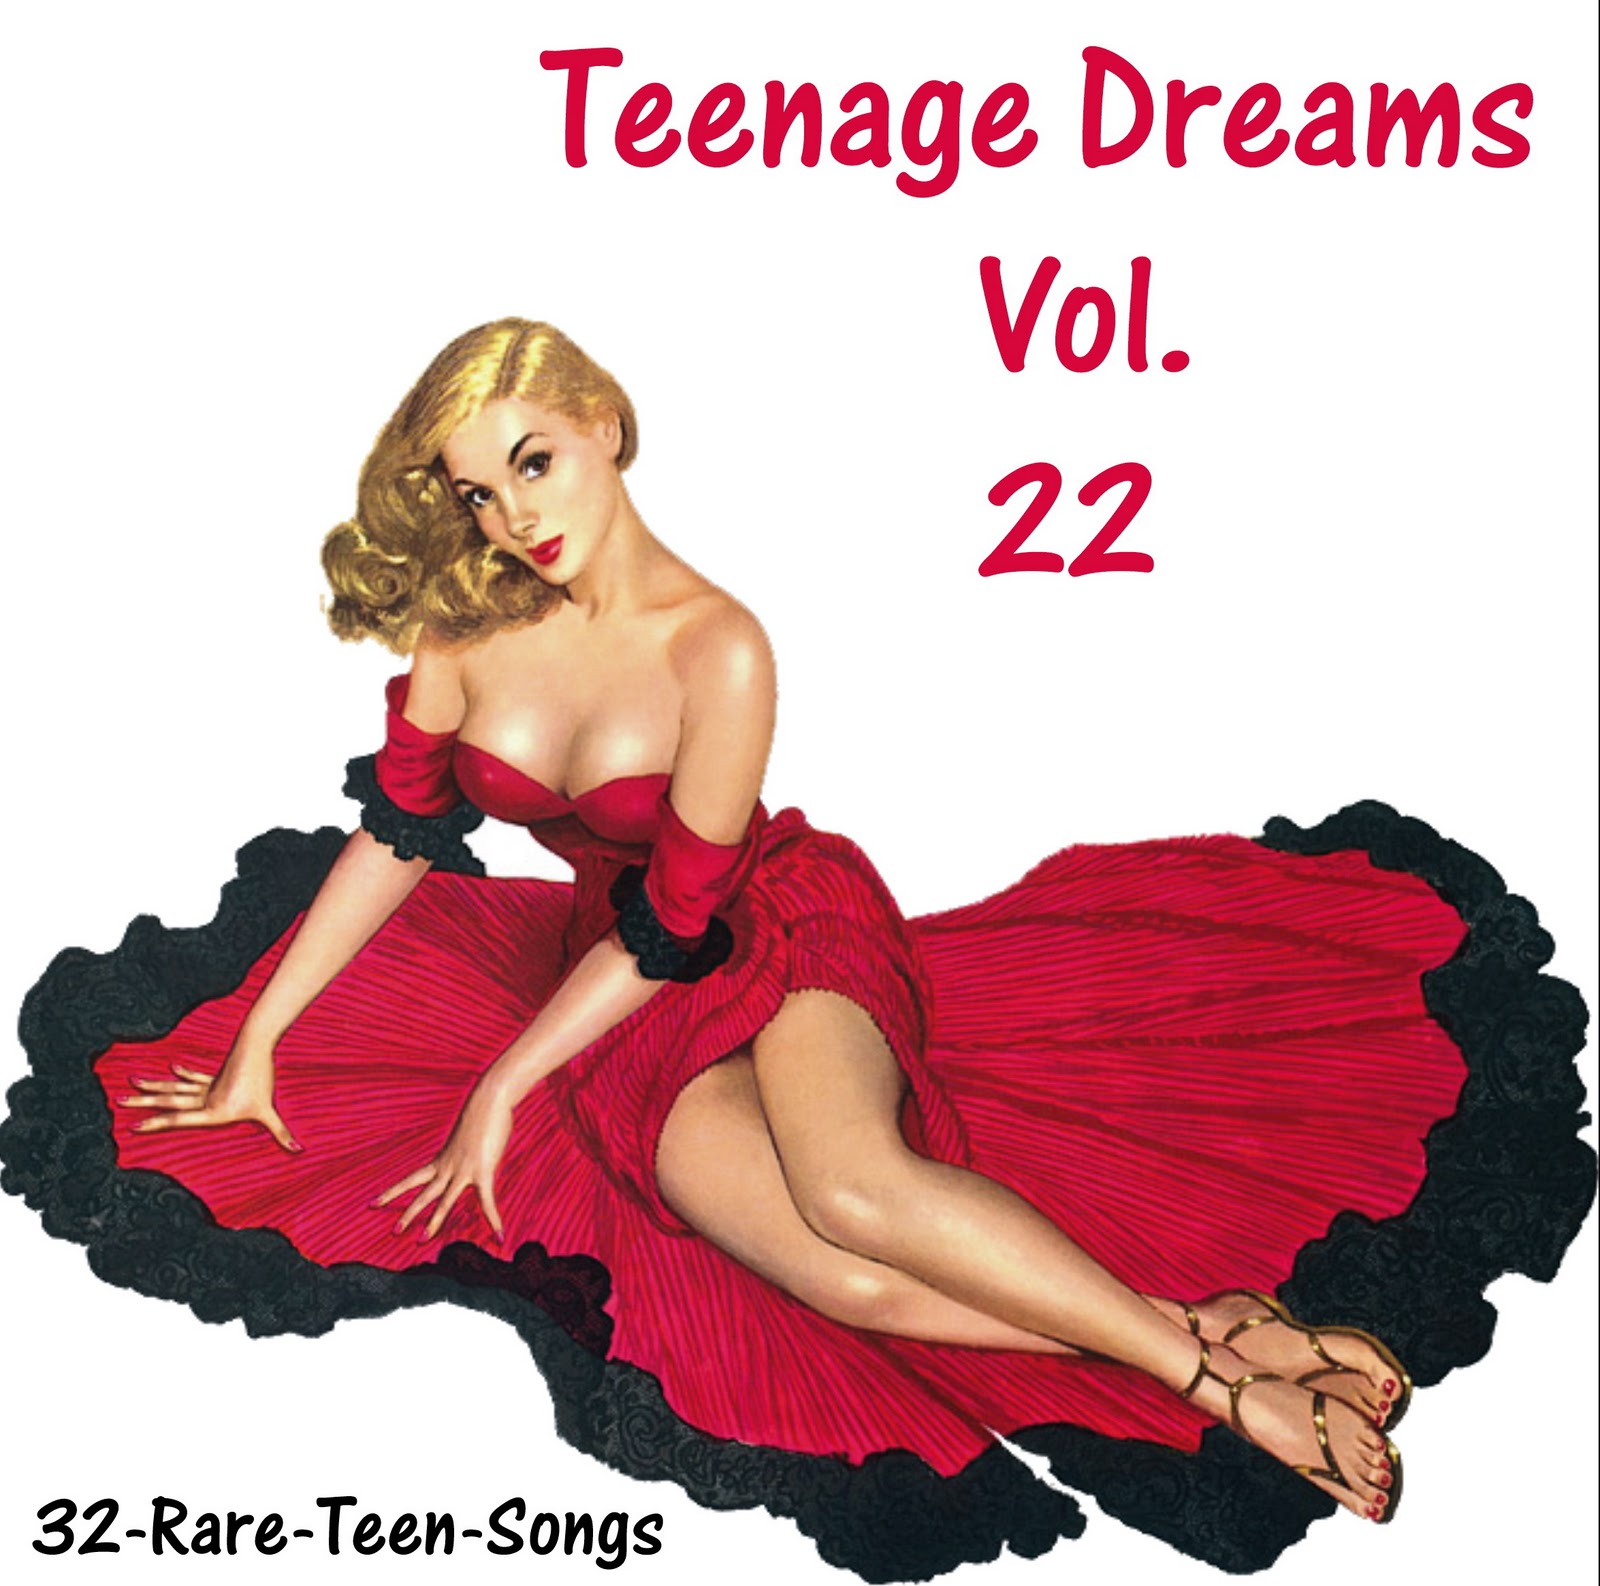 For Teen Dreams Volume Mix 26